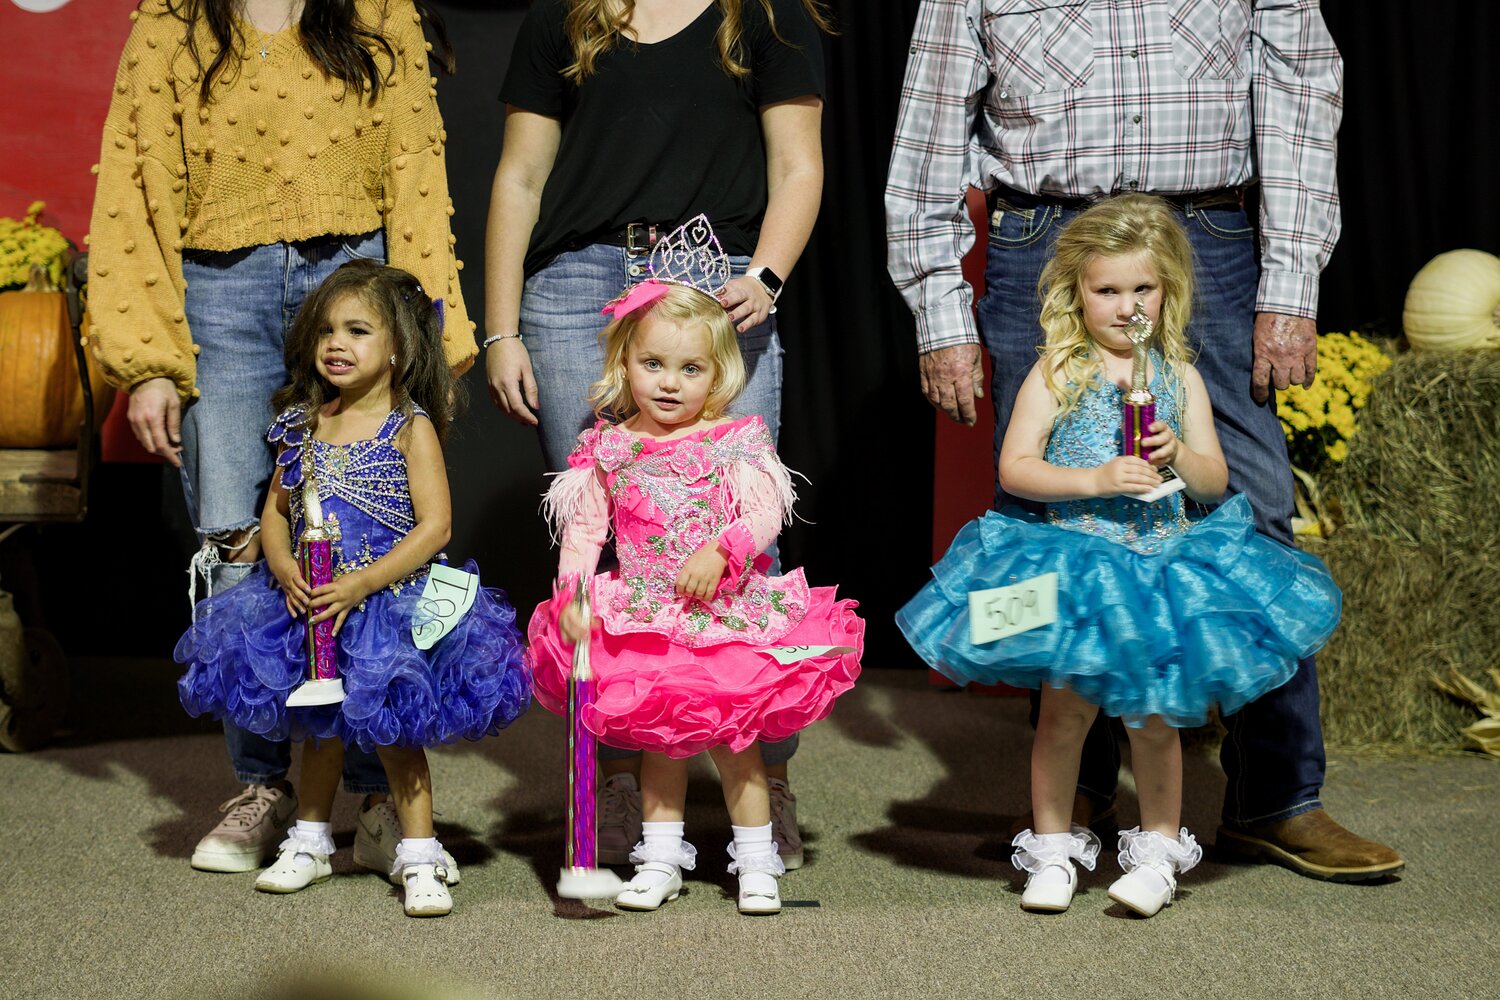 2-3 Year Old Girls - 1st Alternate, Abigail Jay Kennedy, daughter of Seth and Moranda Kennedy of Iuka;  Winner, Ellie Kate Mann, daughter of Allison Daniel and Alex Mann of Belmont; and 2nd Alternate, Opal Aday, daughter of Dillon and Nicole Aday of Tishomingo.